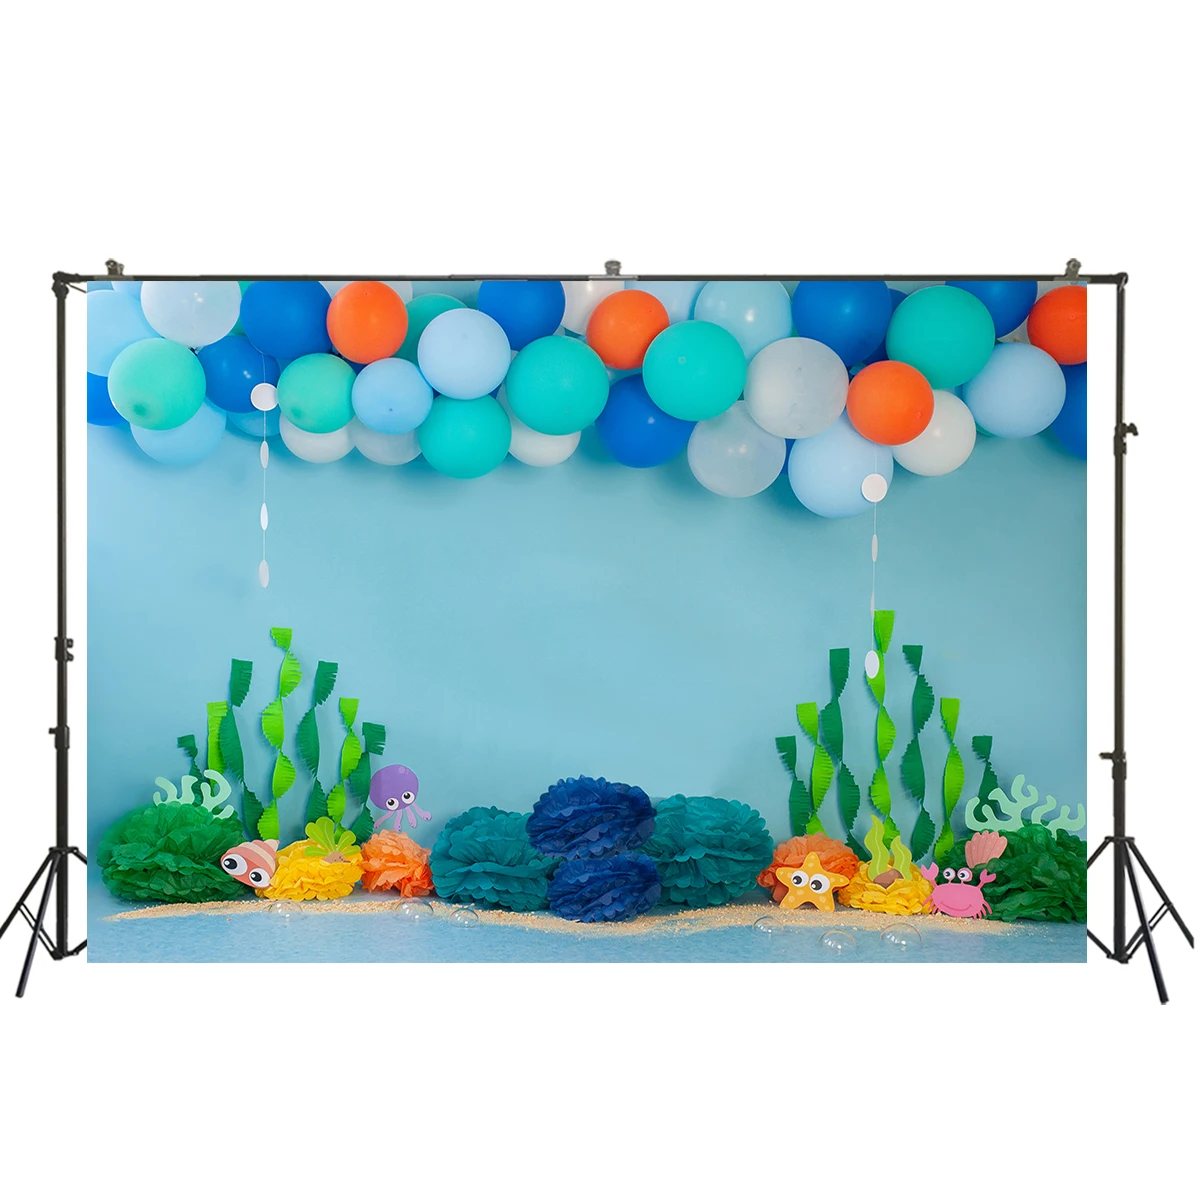 6x6FT Vinyl Photography Backdrop,Fish,Tropical Turtle Water Background for Selfie Birthday Party Pictures Photo Booth Shoot